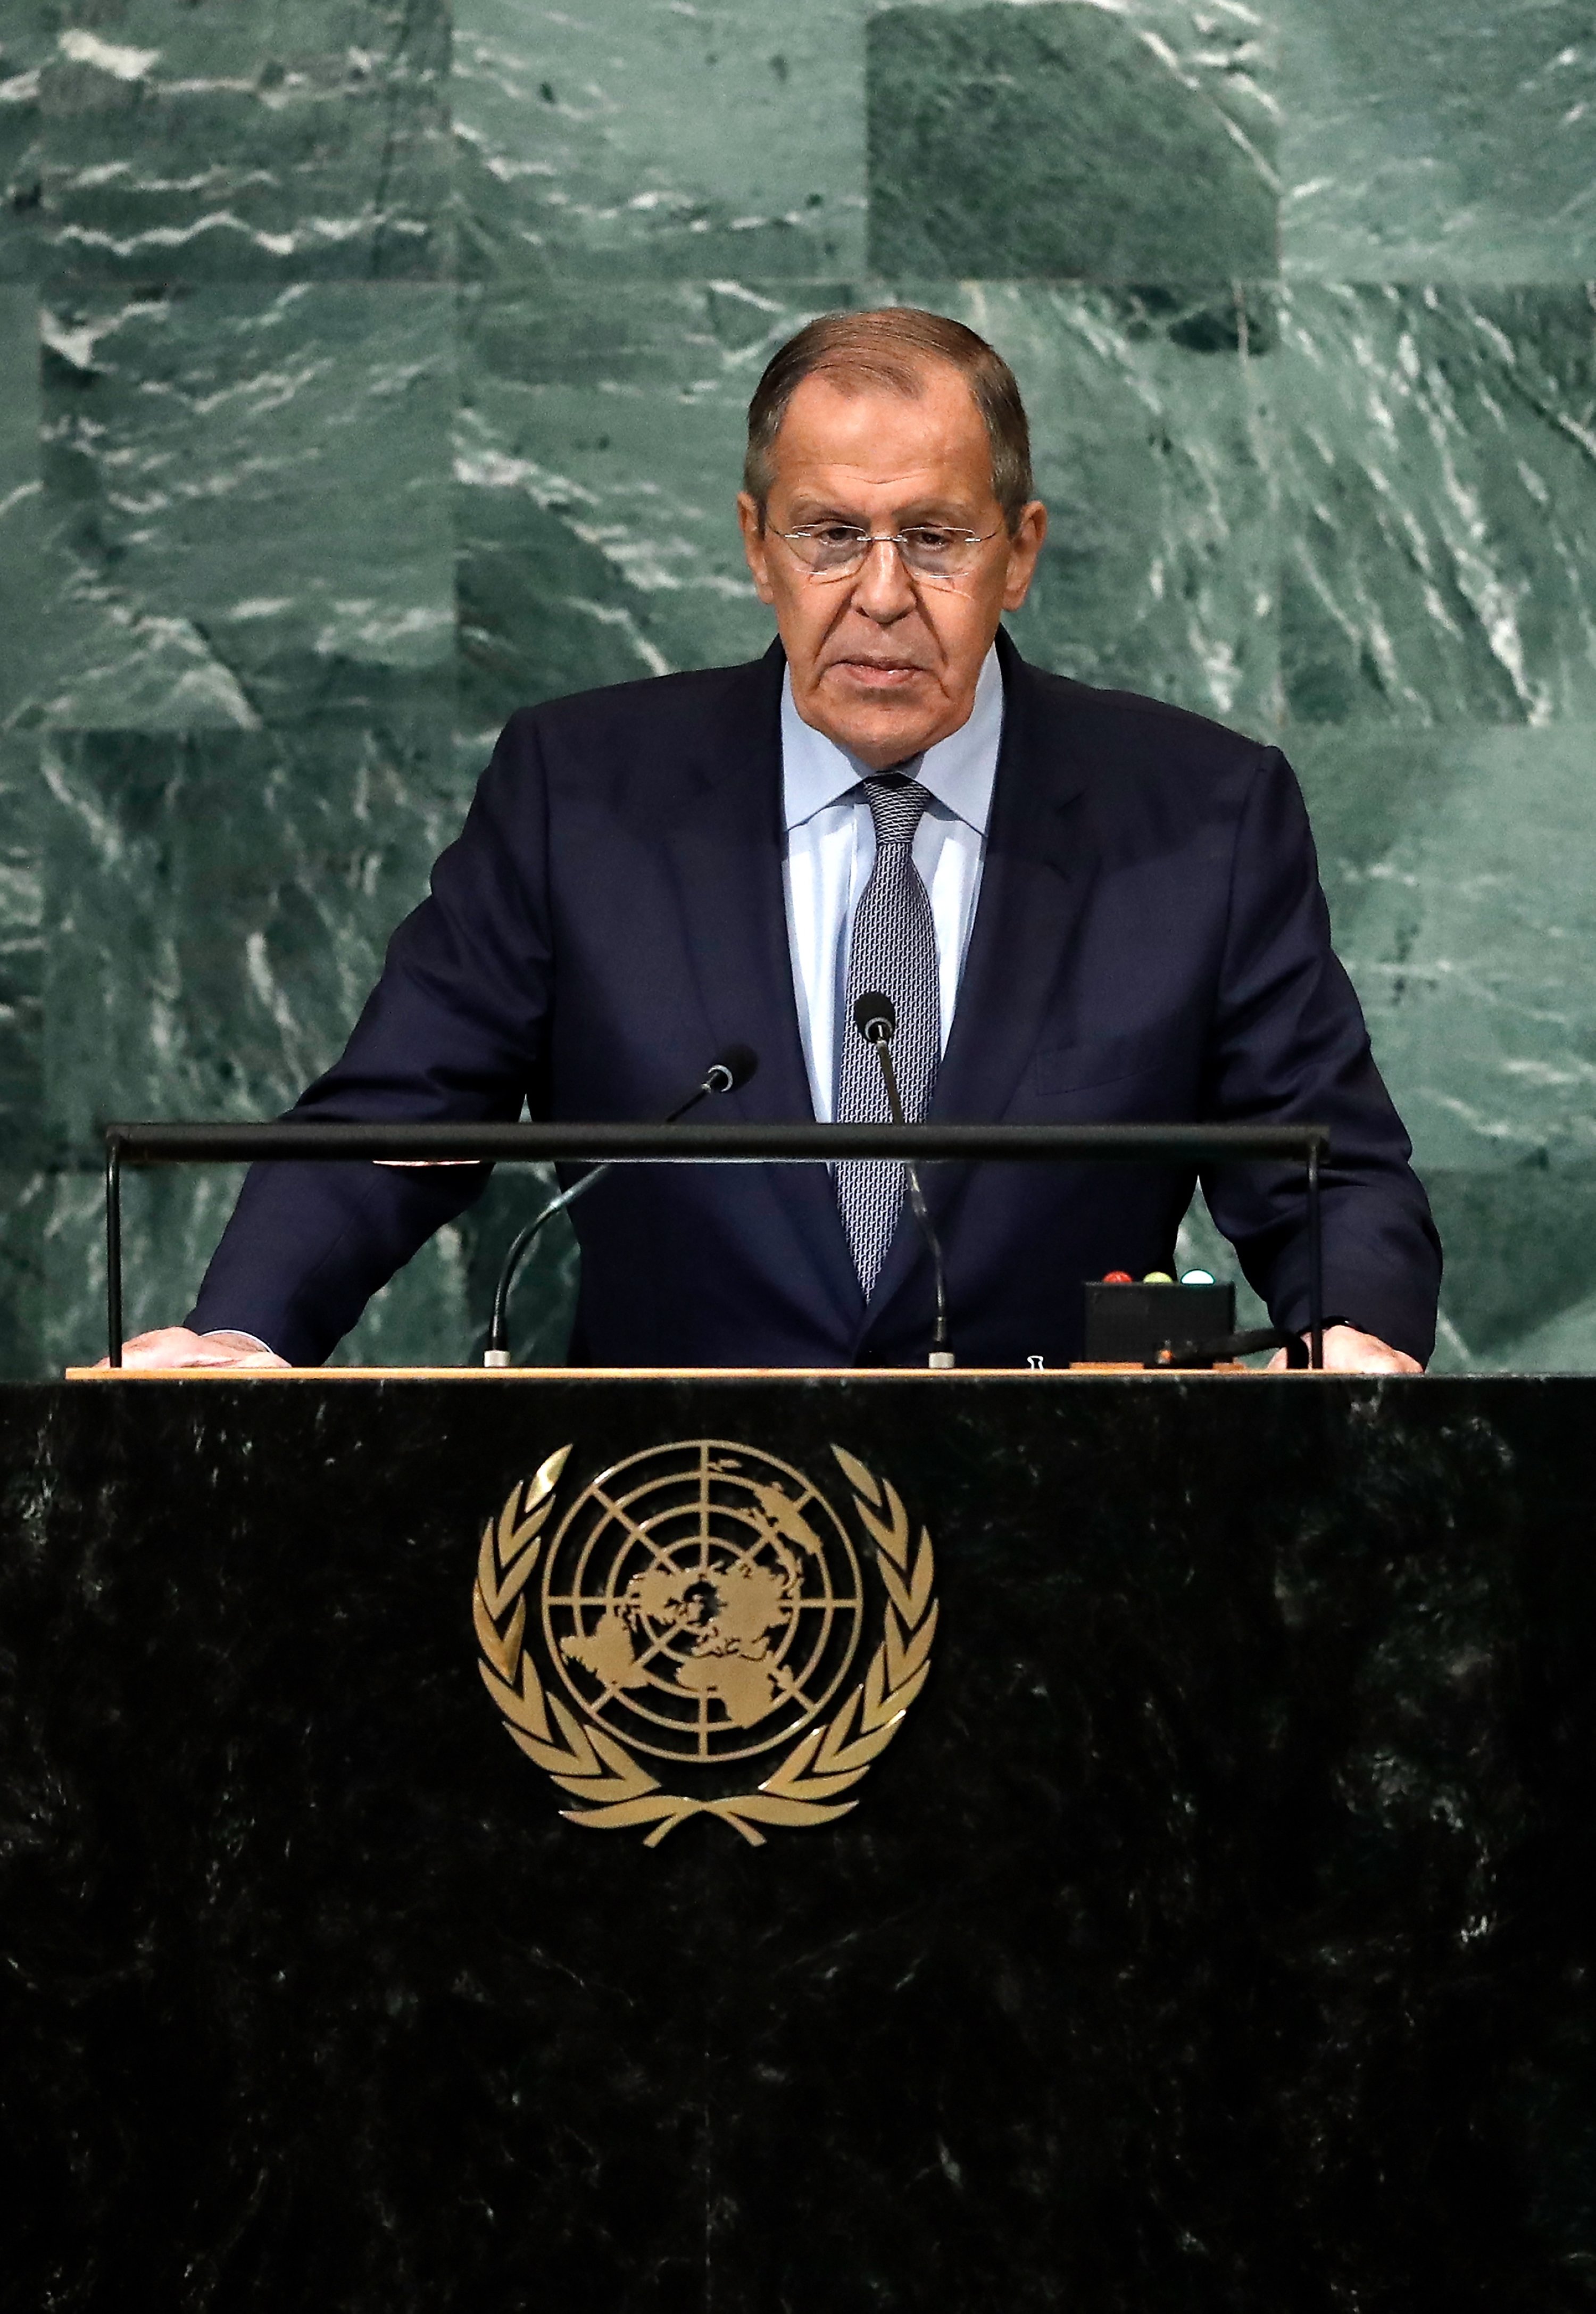 Russian Foreign Minister Sergey Lavrov addresses the 77th session of the U.N. General Assembly, New York, U.S., Sept. 24, 2022. (EPA Photo)